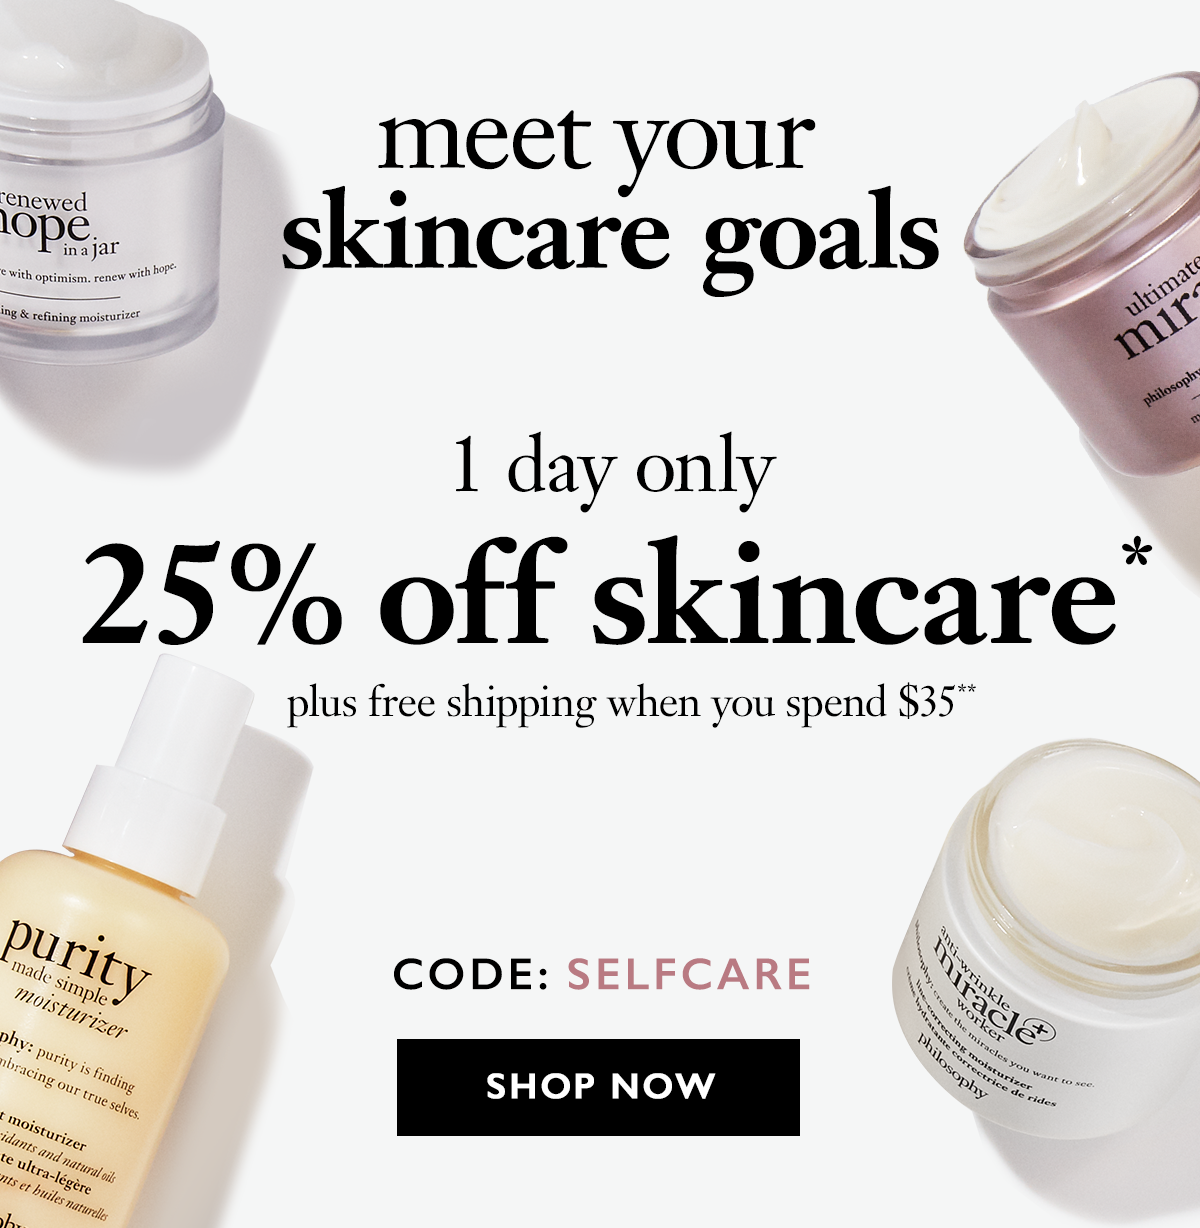 meet your skincare goals | use Code: SELFCARE